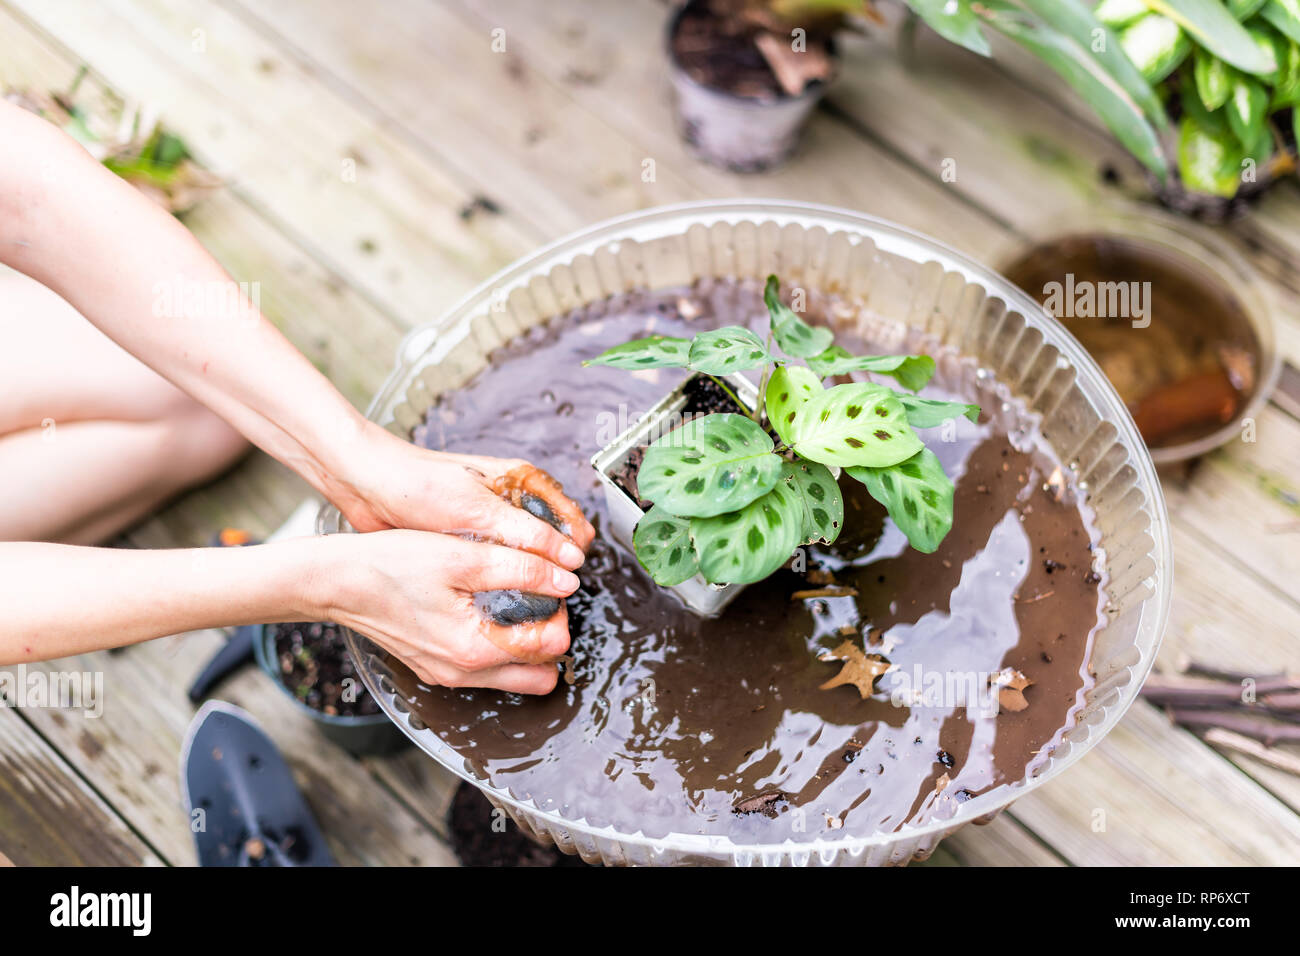 Woman hand washing potted calathea zebra peacock plant with dirt and soil pot flowerpot outside home garden backyard with water planting seedling Stock Photo